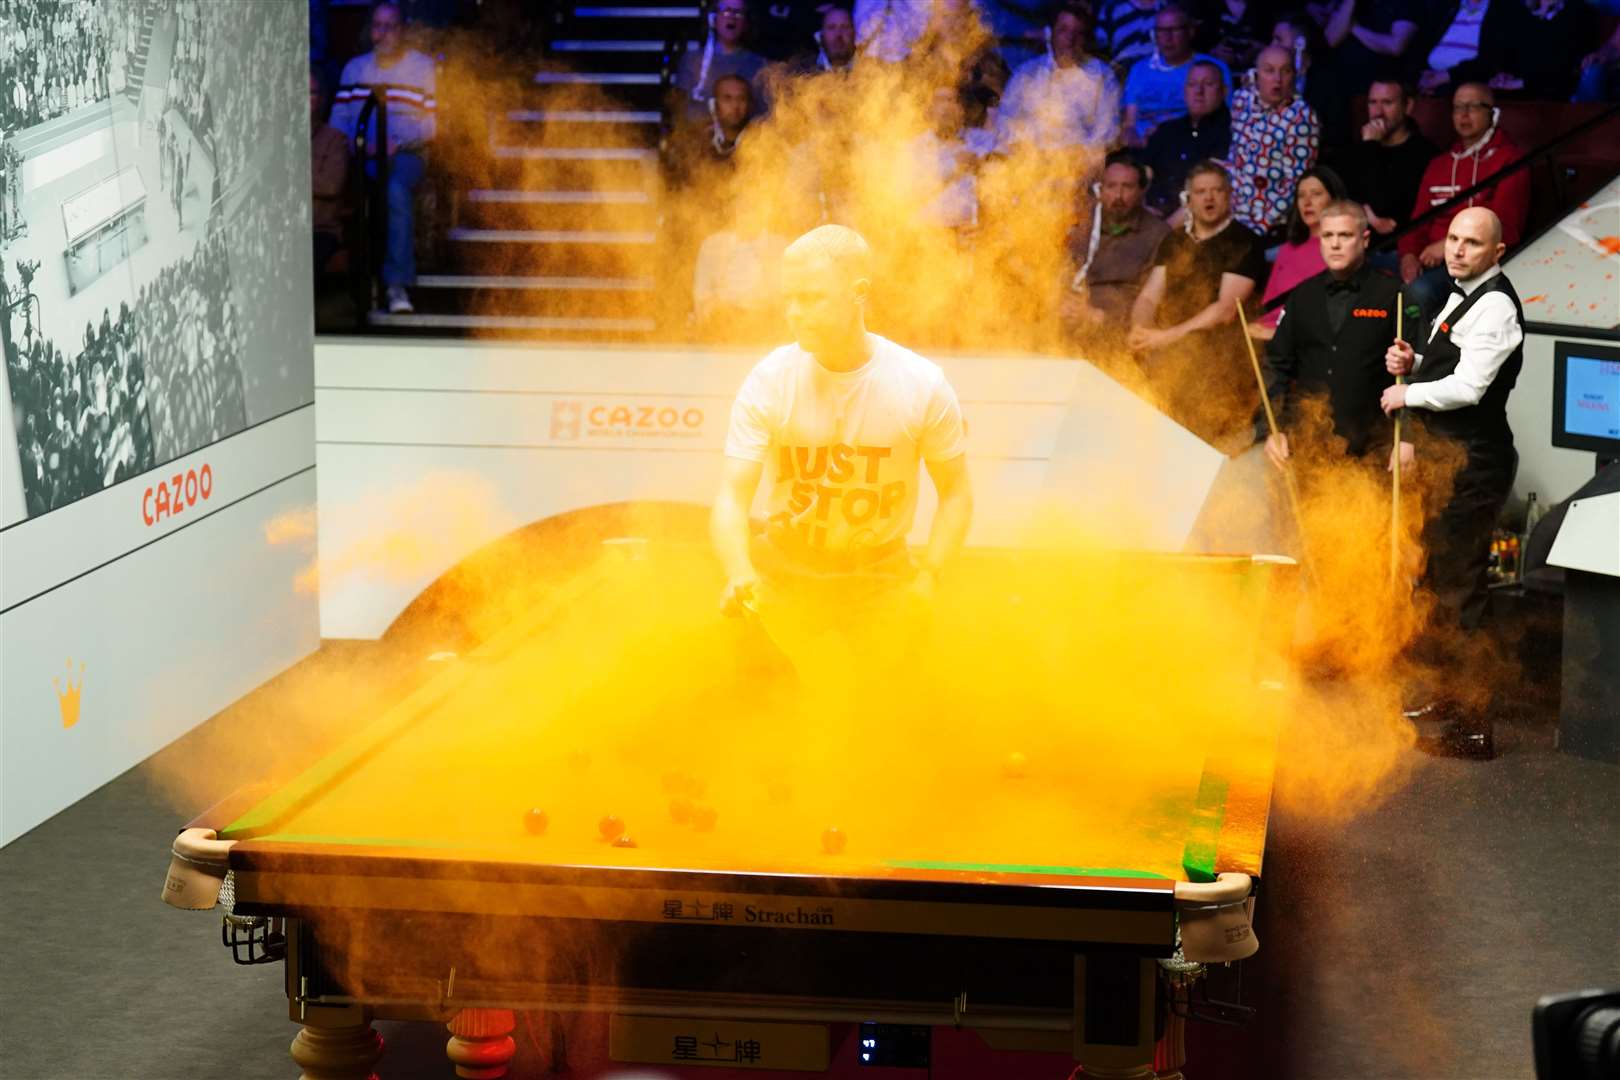 A Just Stop Oil protester jumps on the table and throws orange powder during the match between Robert Milkins against Joe Perry during day three of the Cazoo World Snooker Championship at the Crucible Theatre, Sheffield (Mike Egerton/PA)